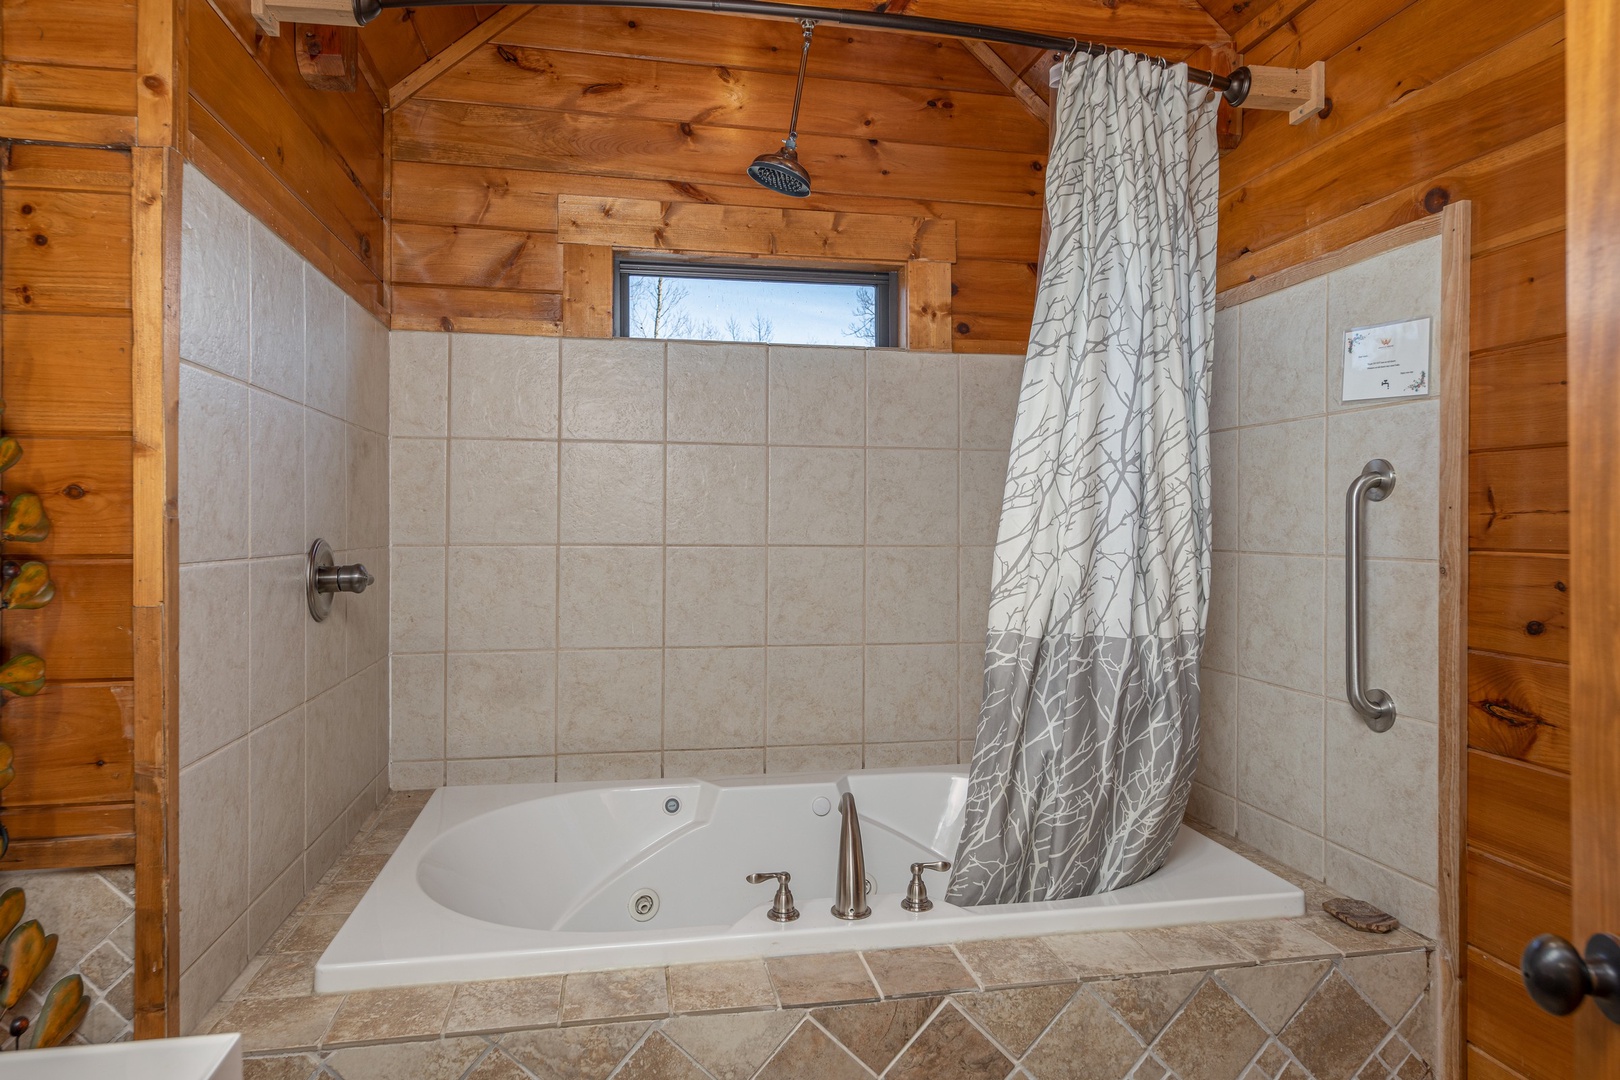 Bathroom with a jacuzzi and shower at King of the Mountain, a 3 bedroom cabin rental located in Pigeon Forge